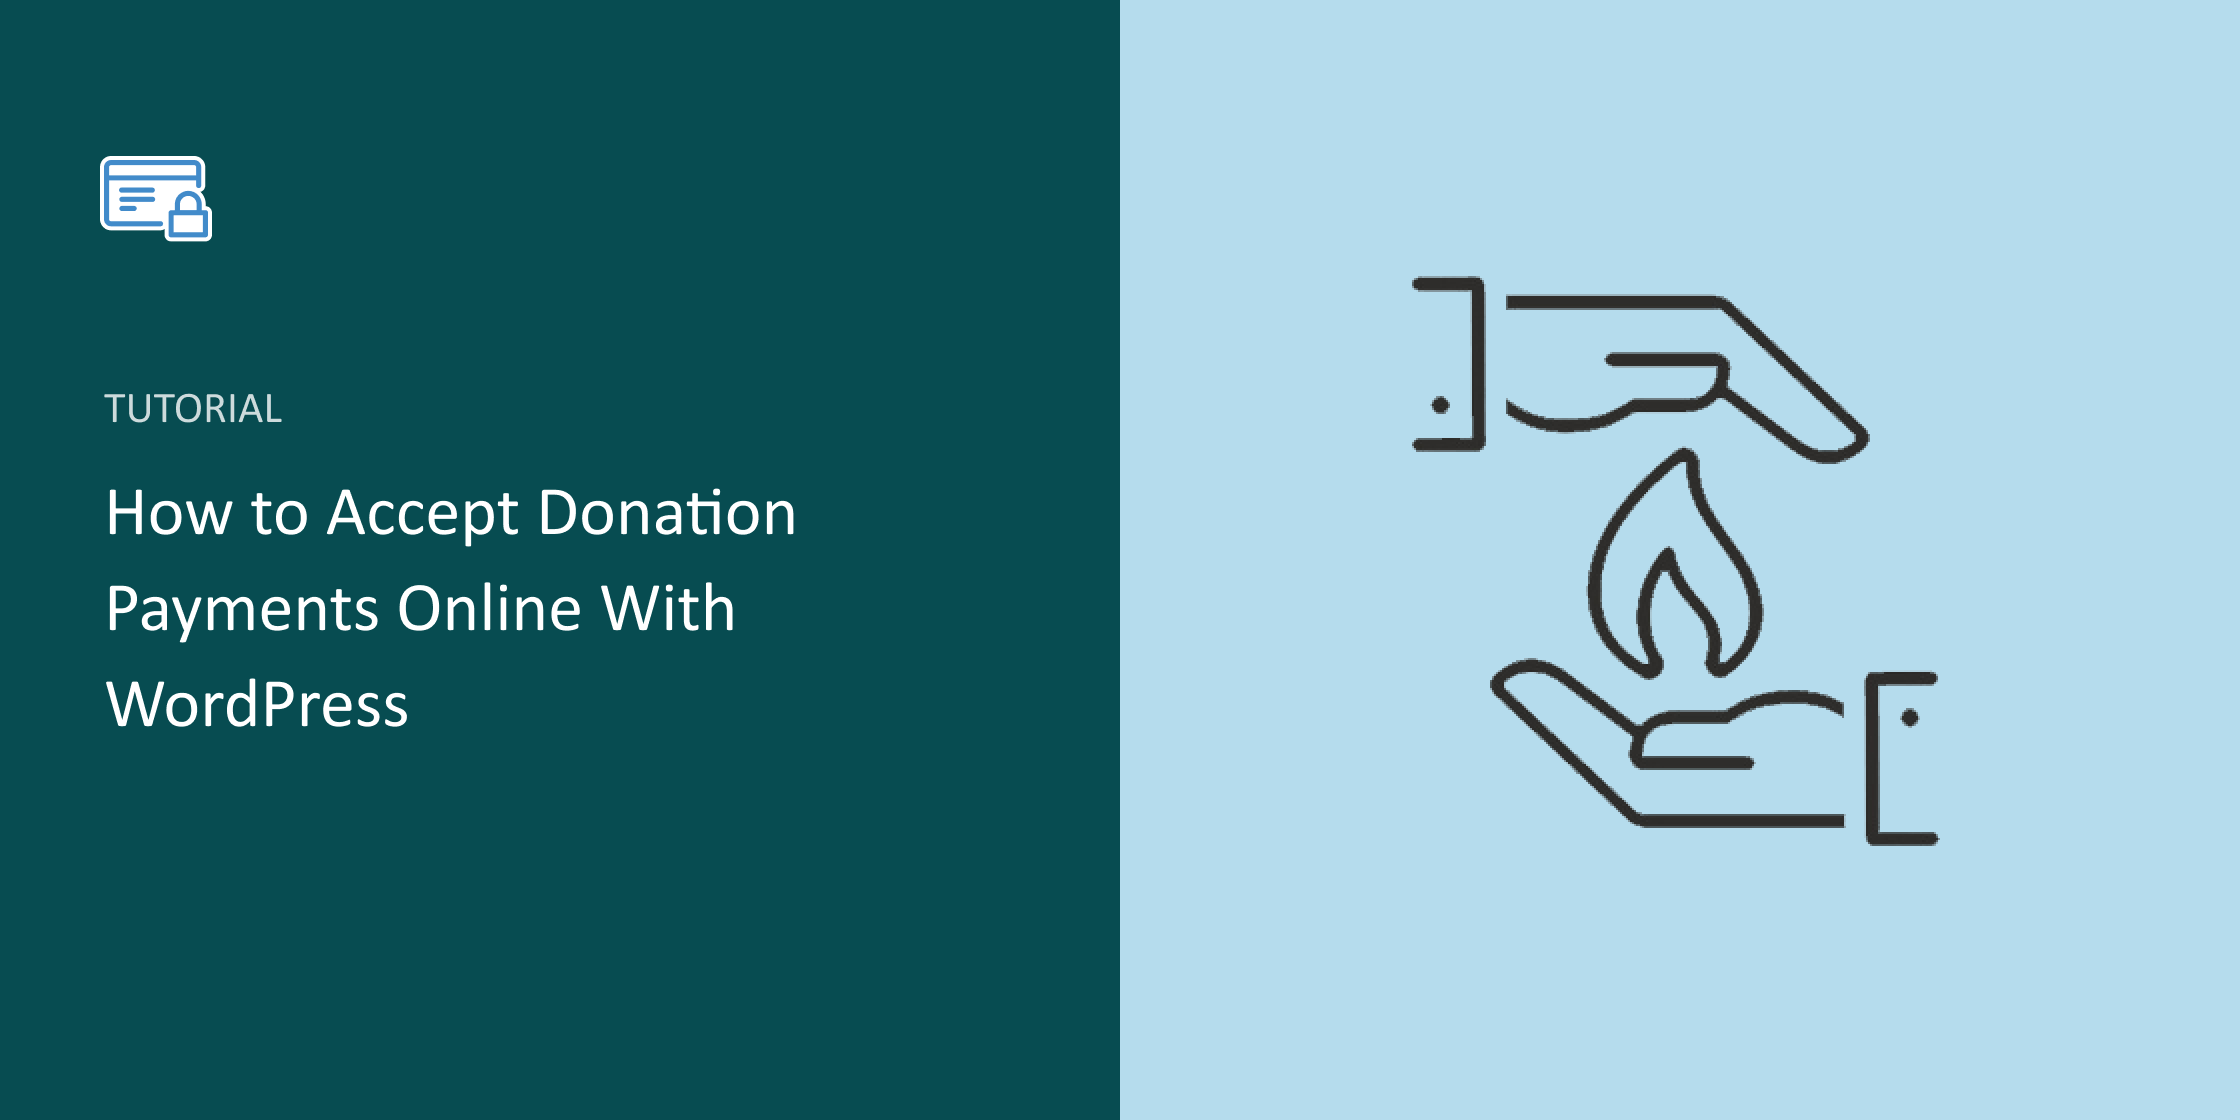 How to Accept Donation Payments Online With WordPress